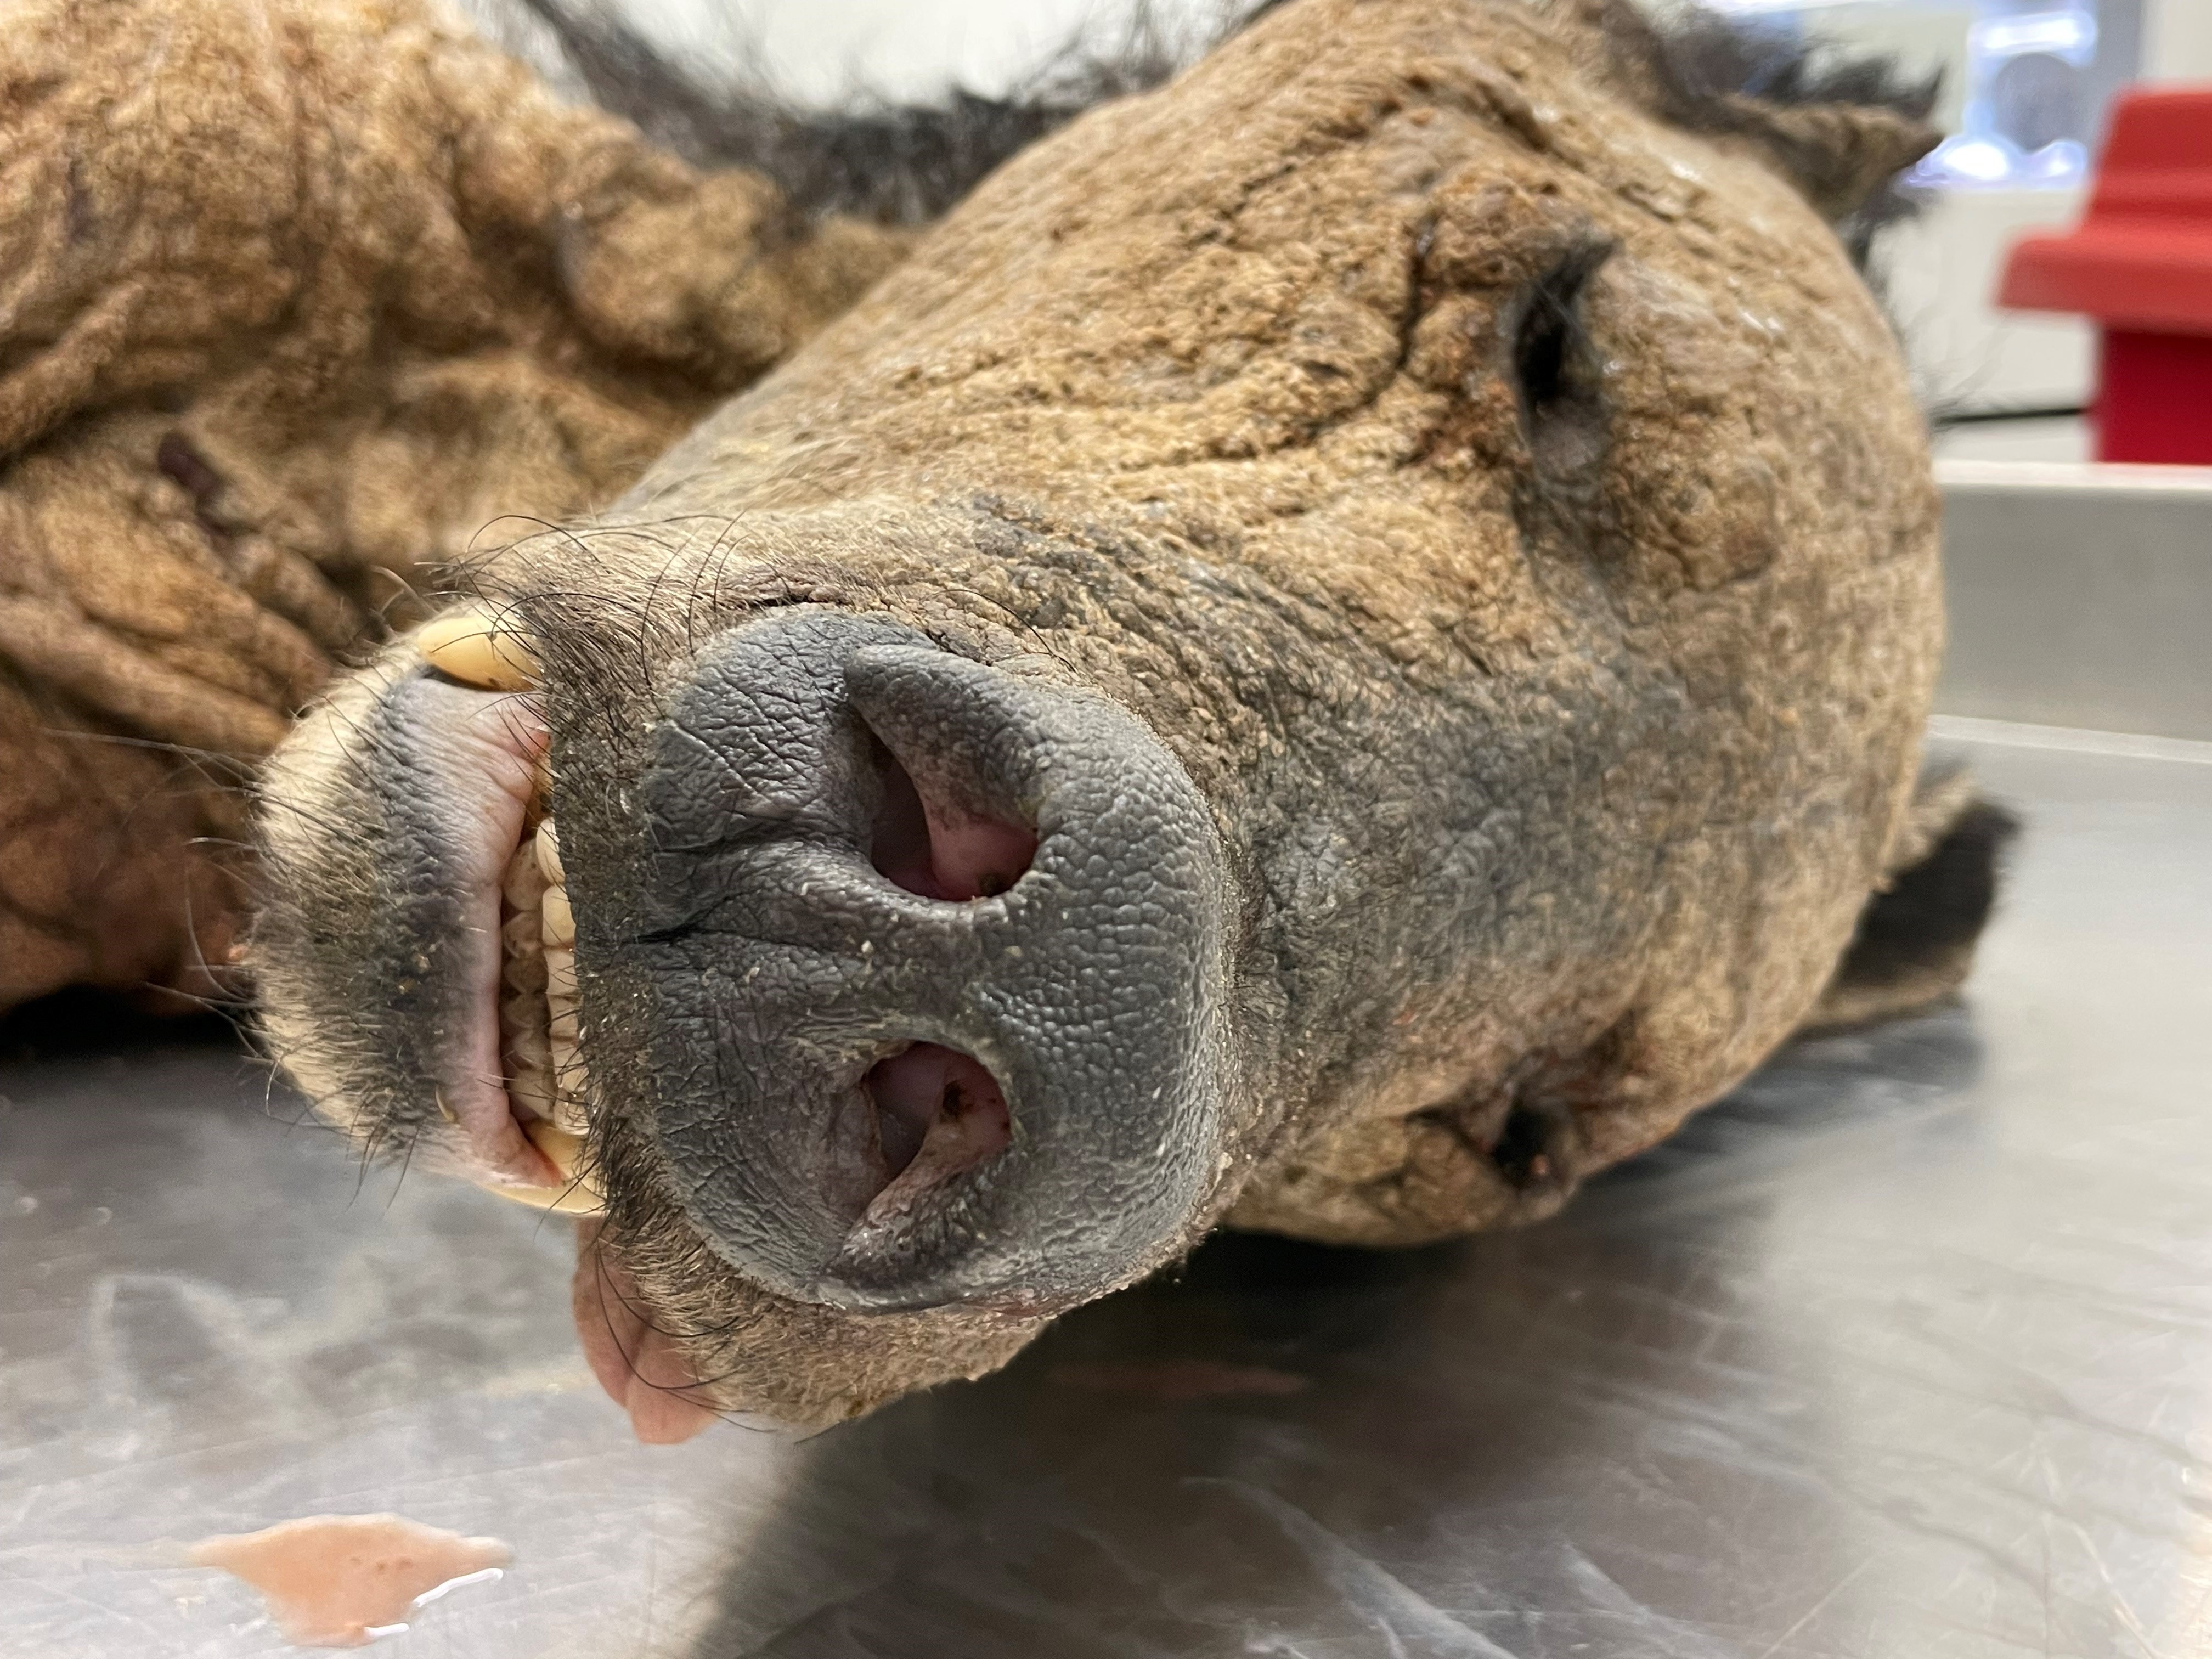 black bear face with severe mange infection